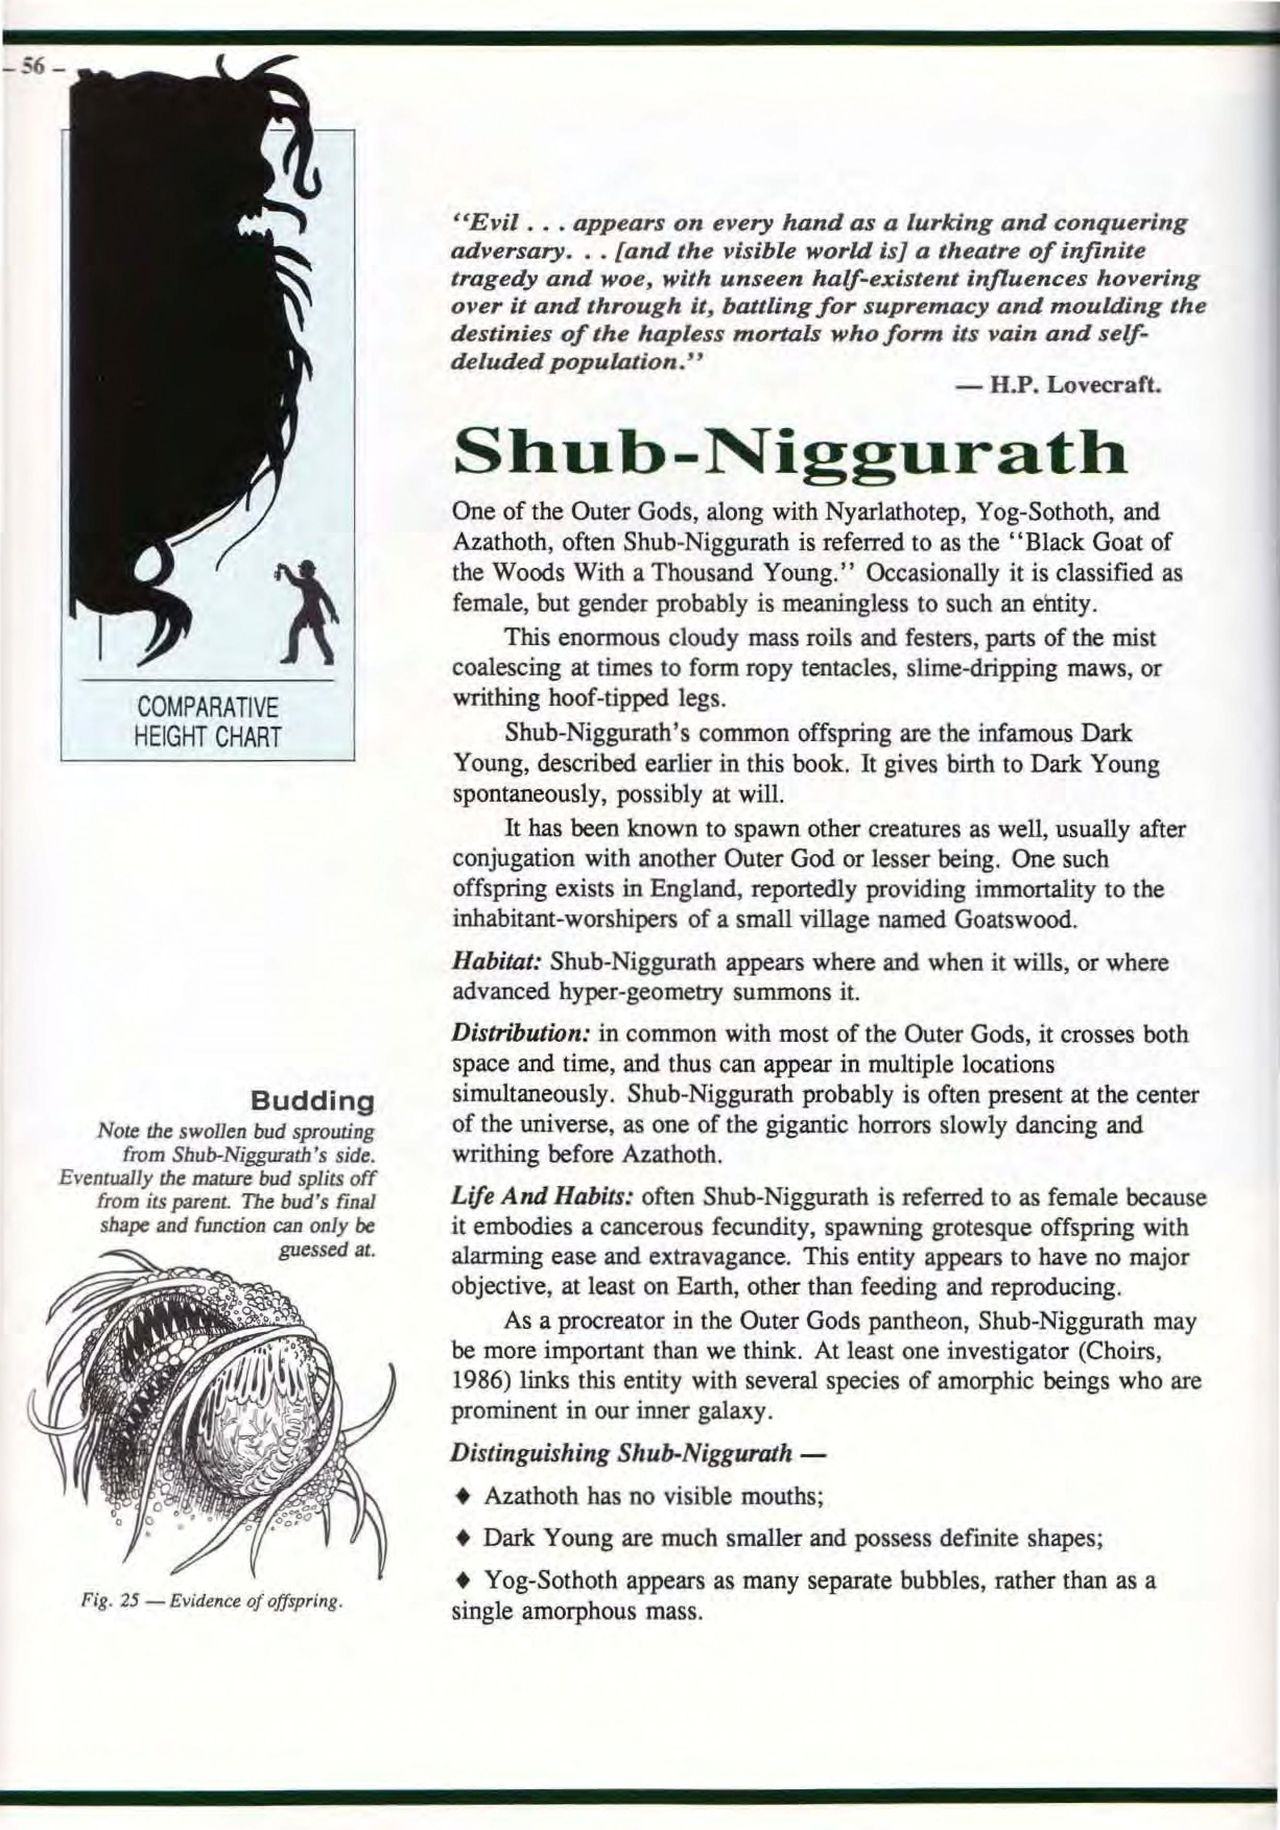 S. Petersen's Field Guide to Cthulhu Monsters 55